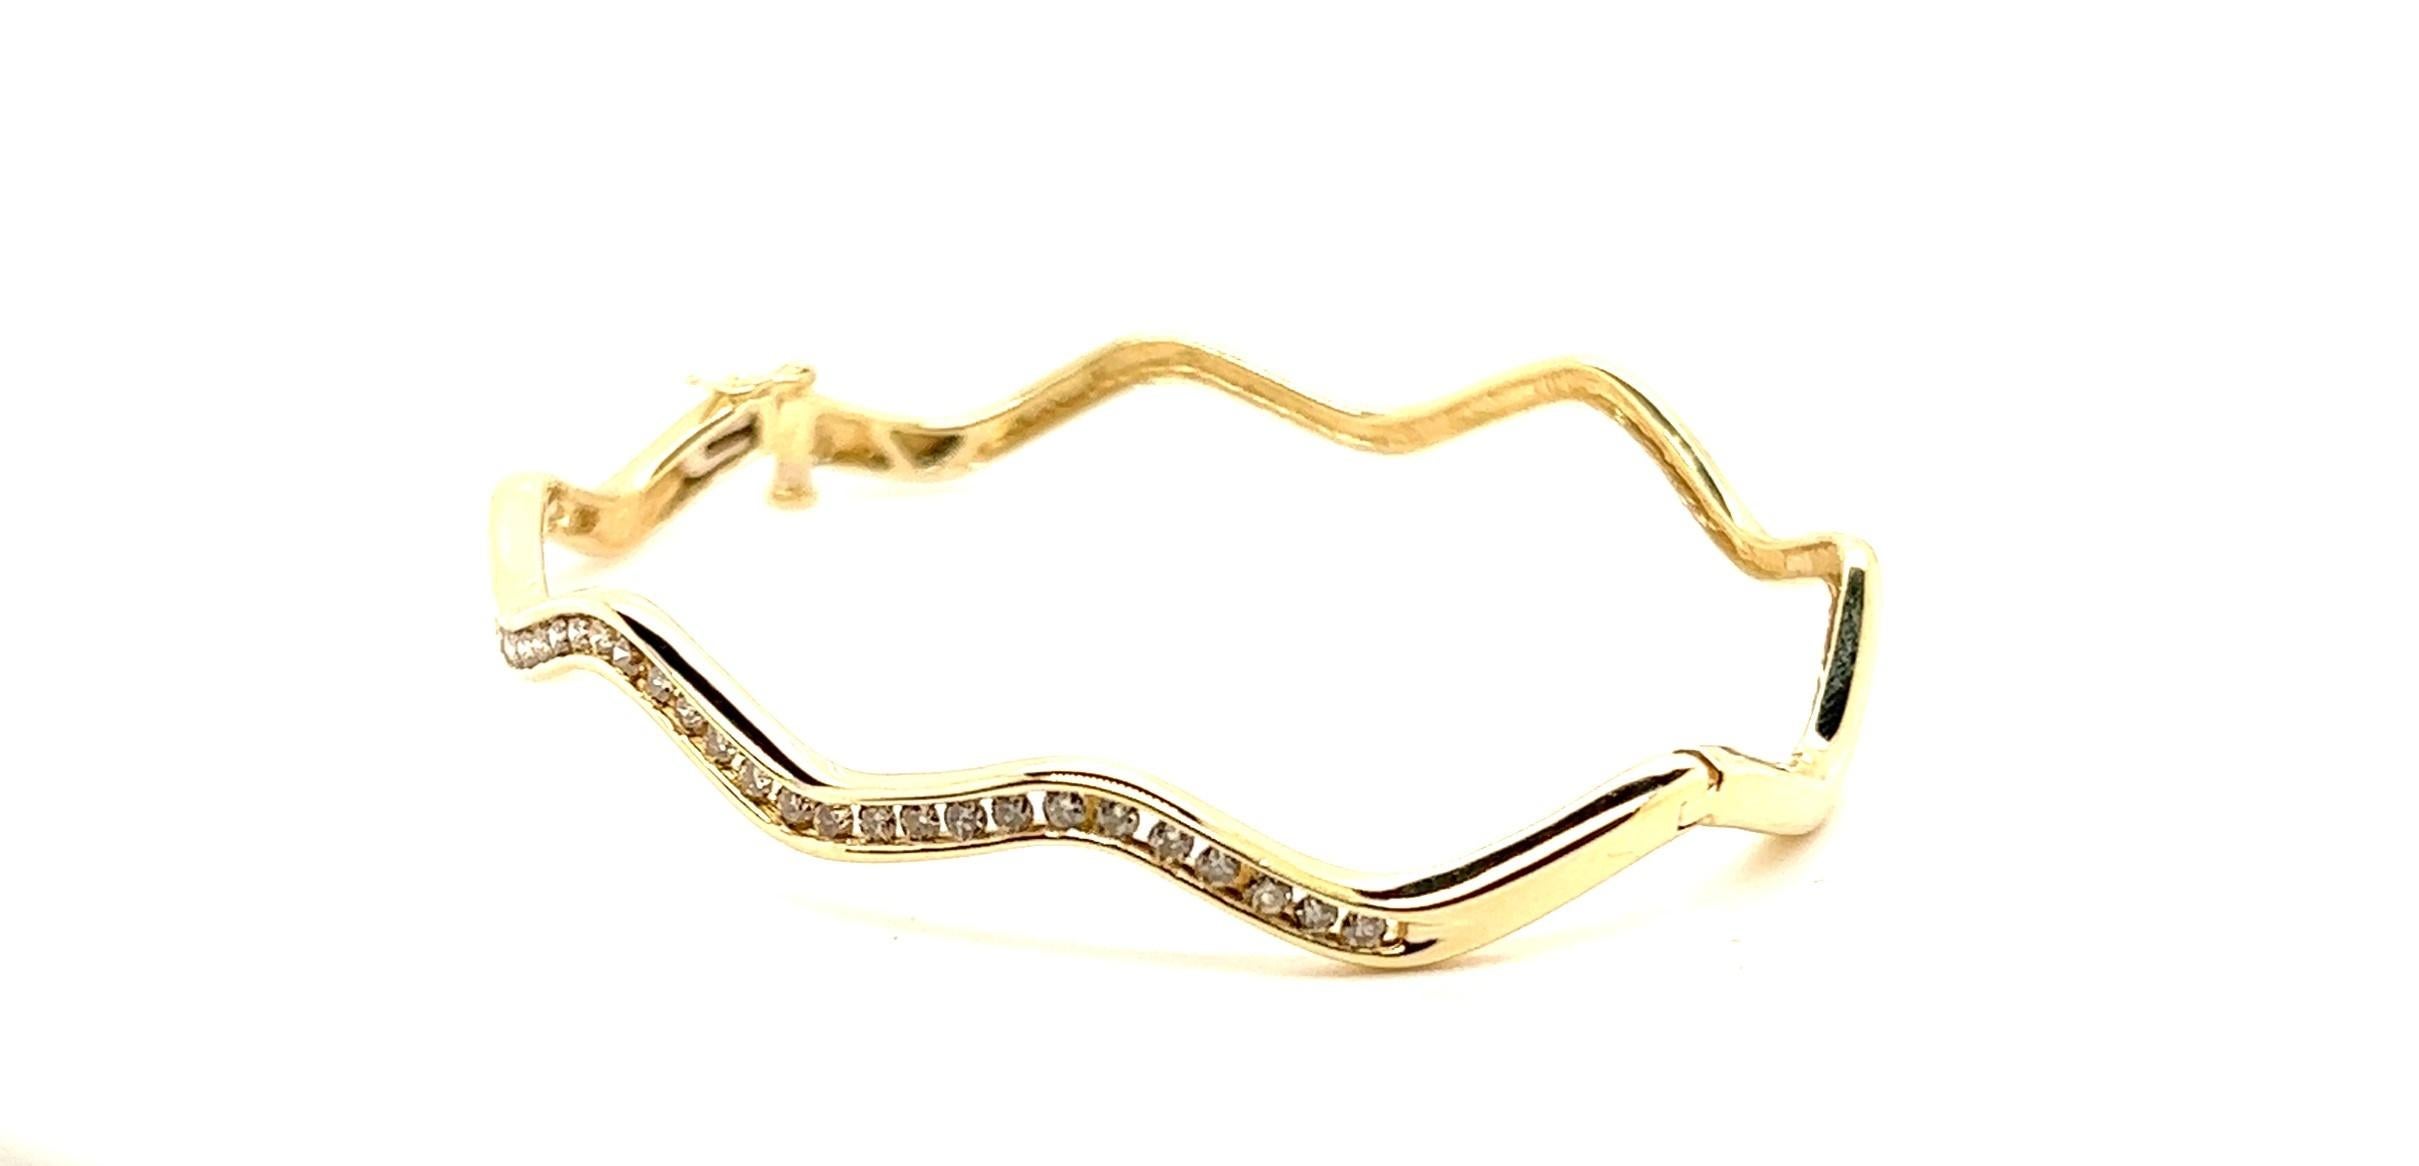 Classic with a twist! Take a classic bangle channel set bangle and make it a zig-zag  pattern. Now you can have something else to stack with your other bangles or just something else no one else will have!

The bangle is 14kt yellow gold with